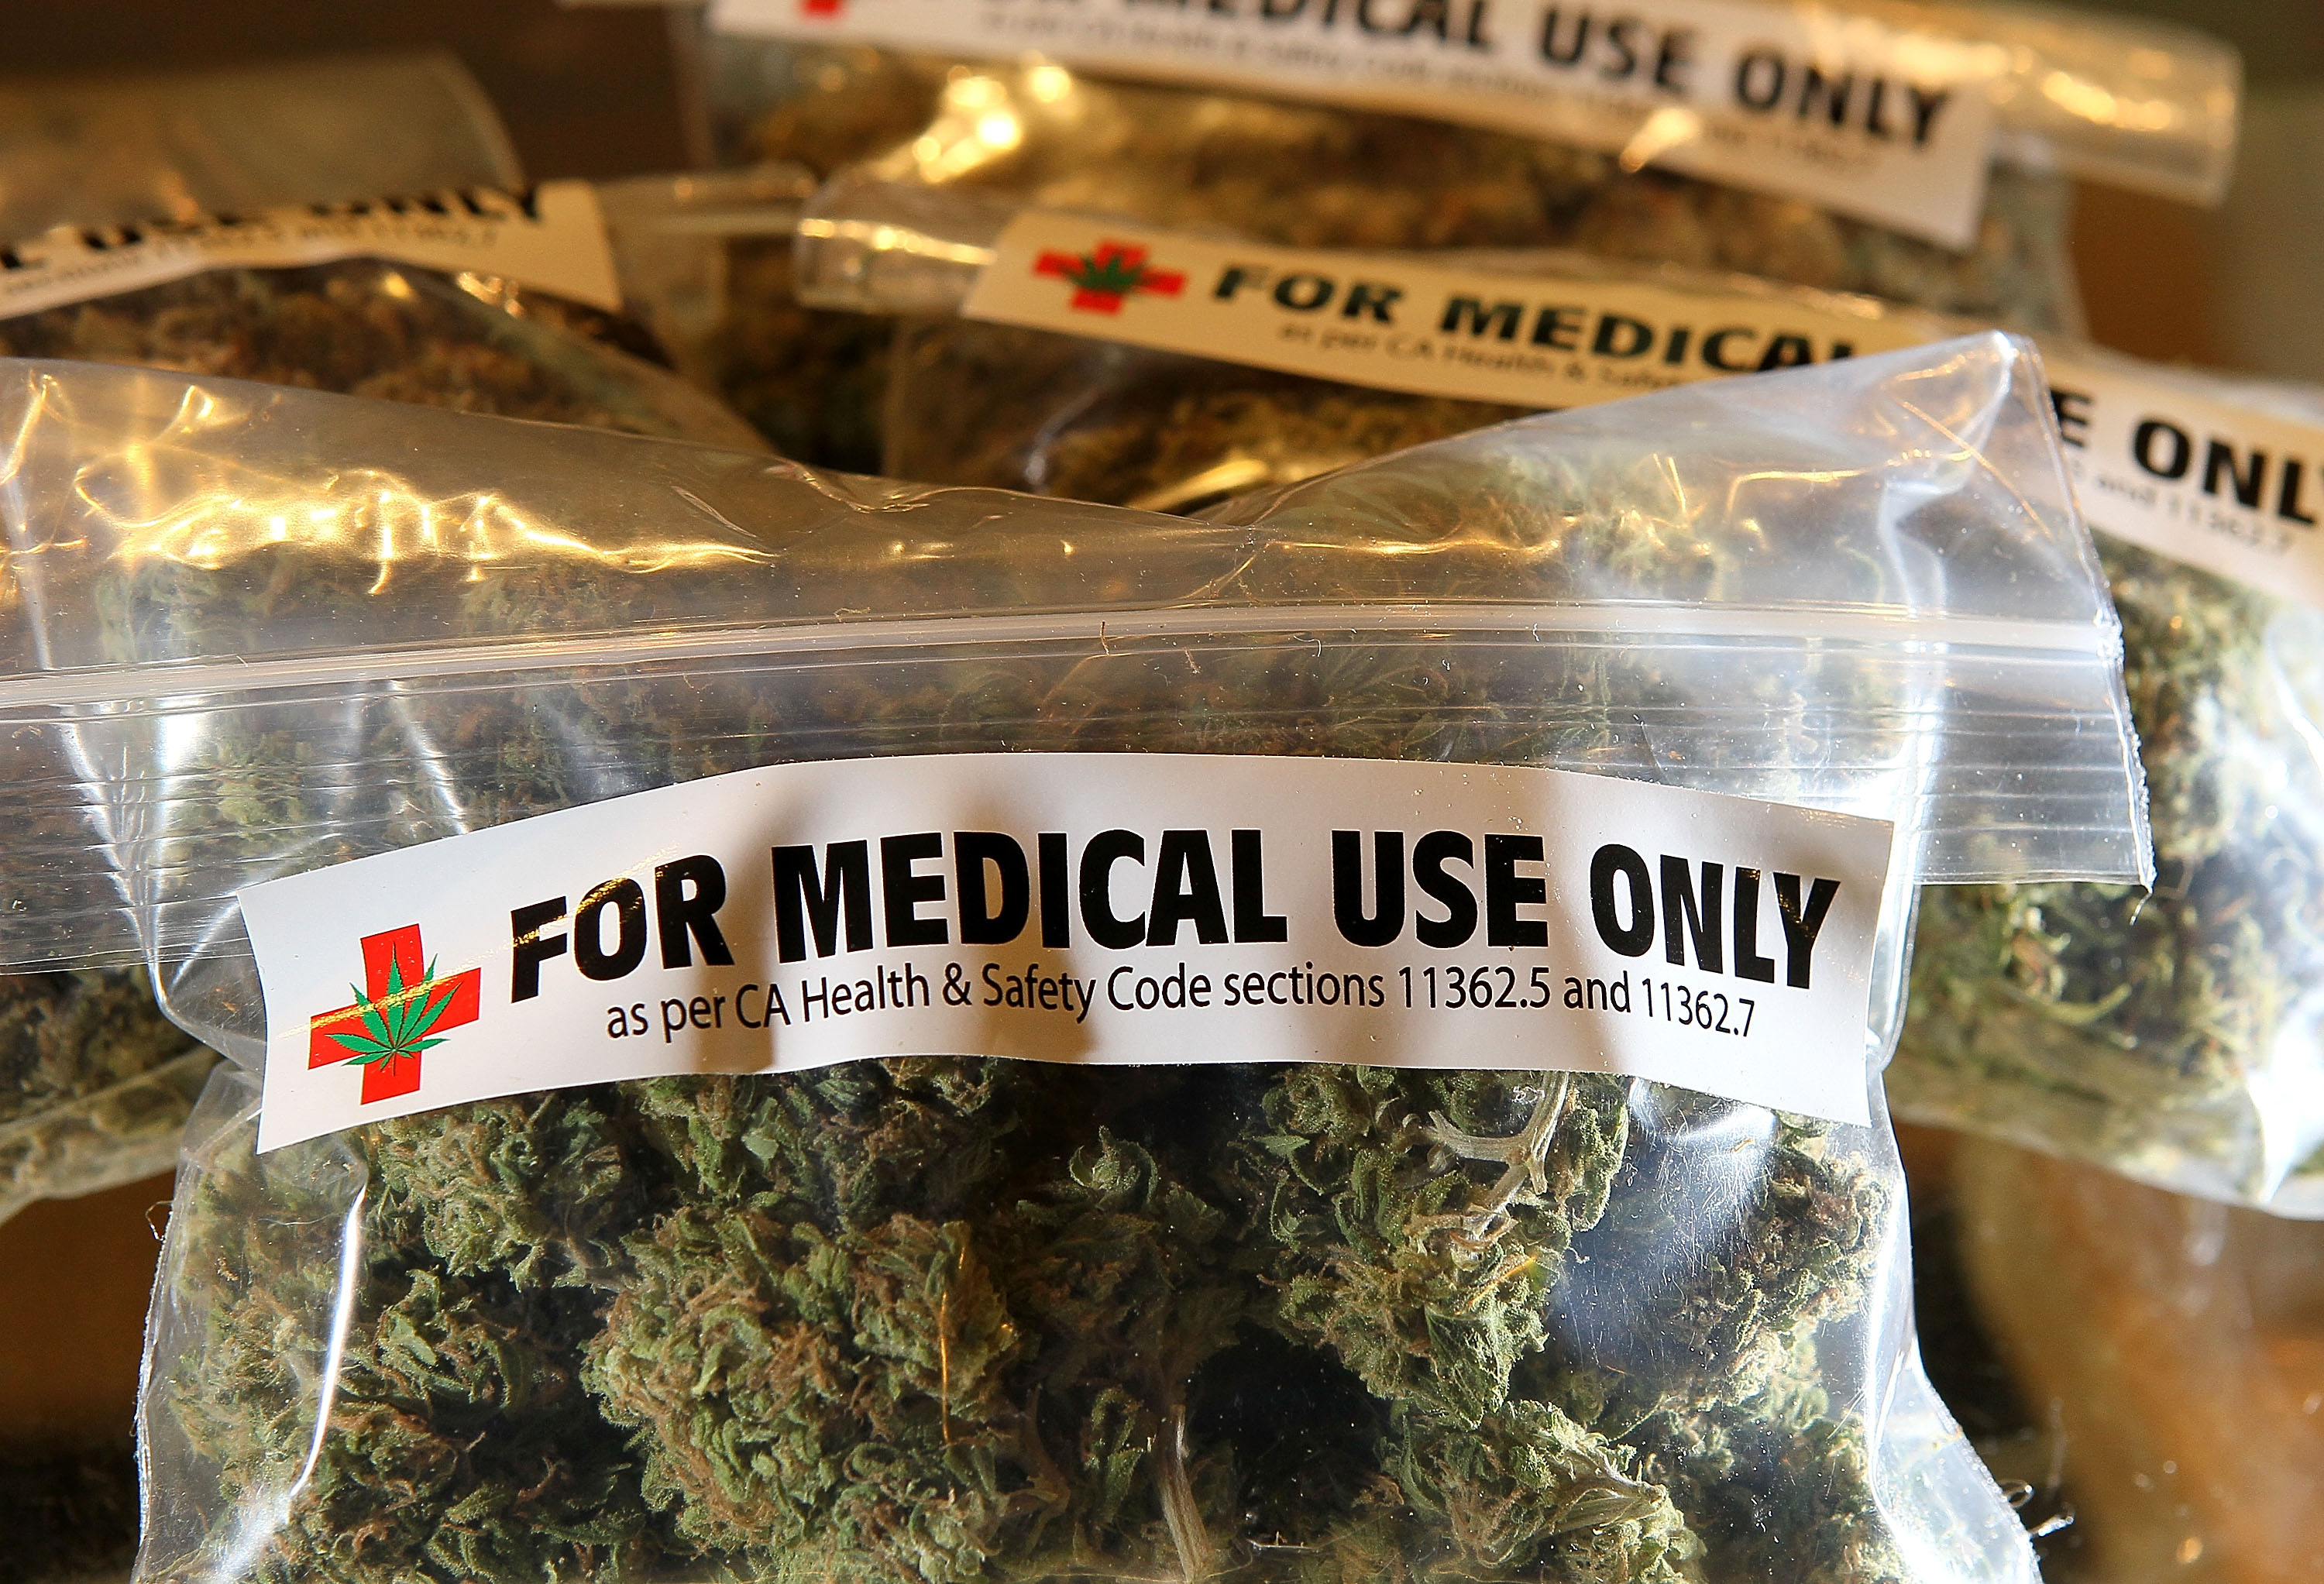 why medical marijuanas should not be legal